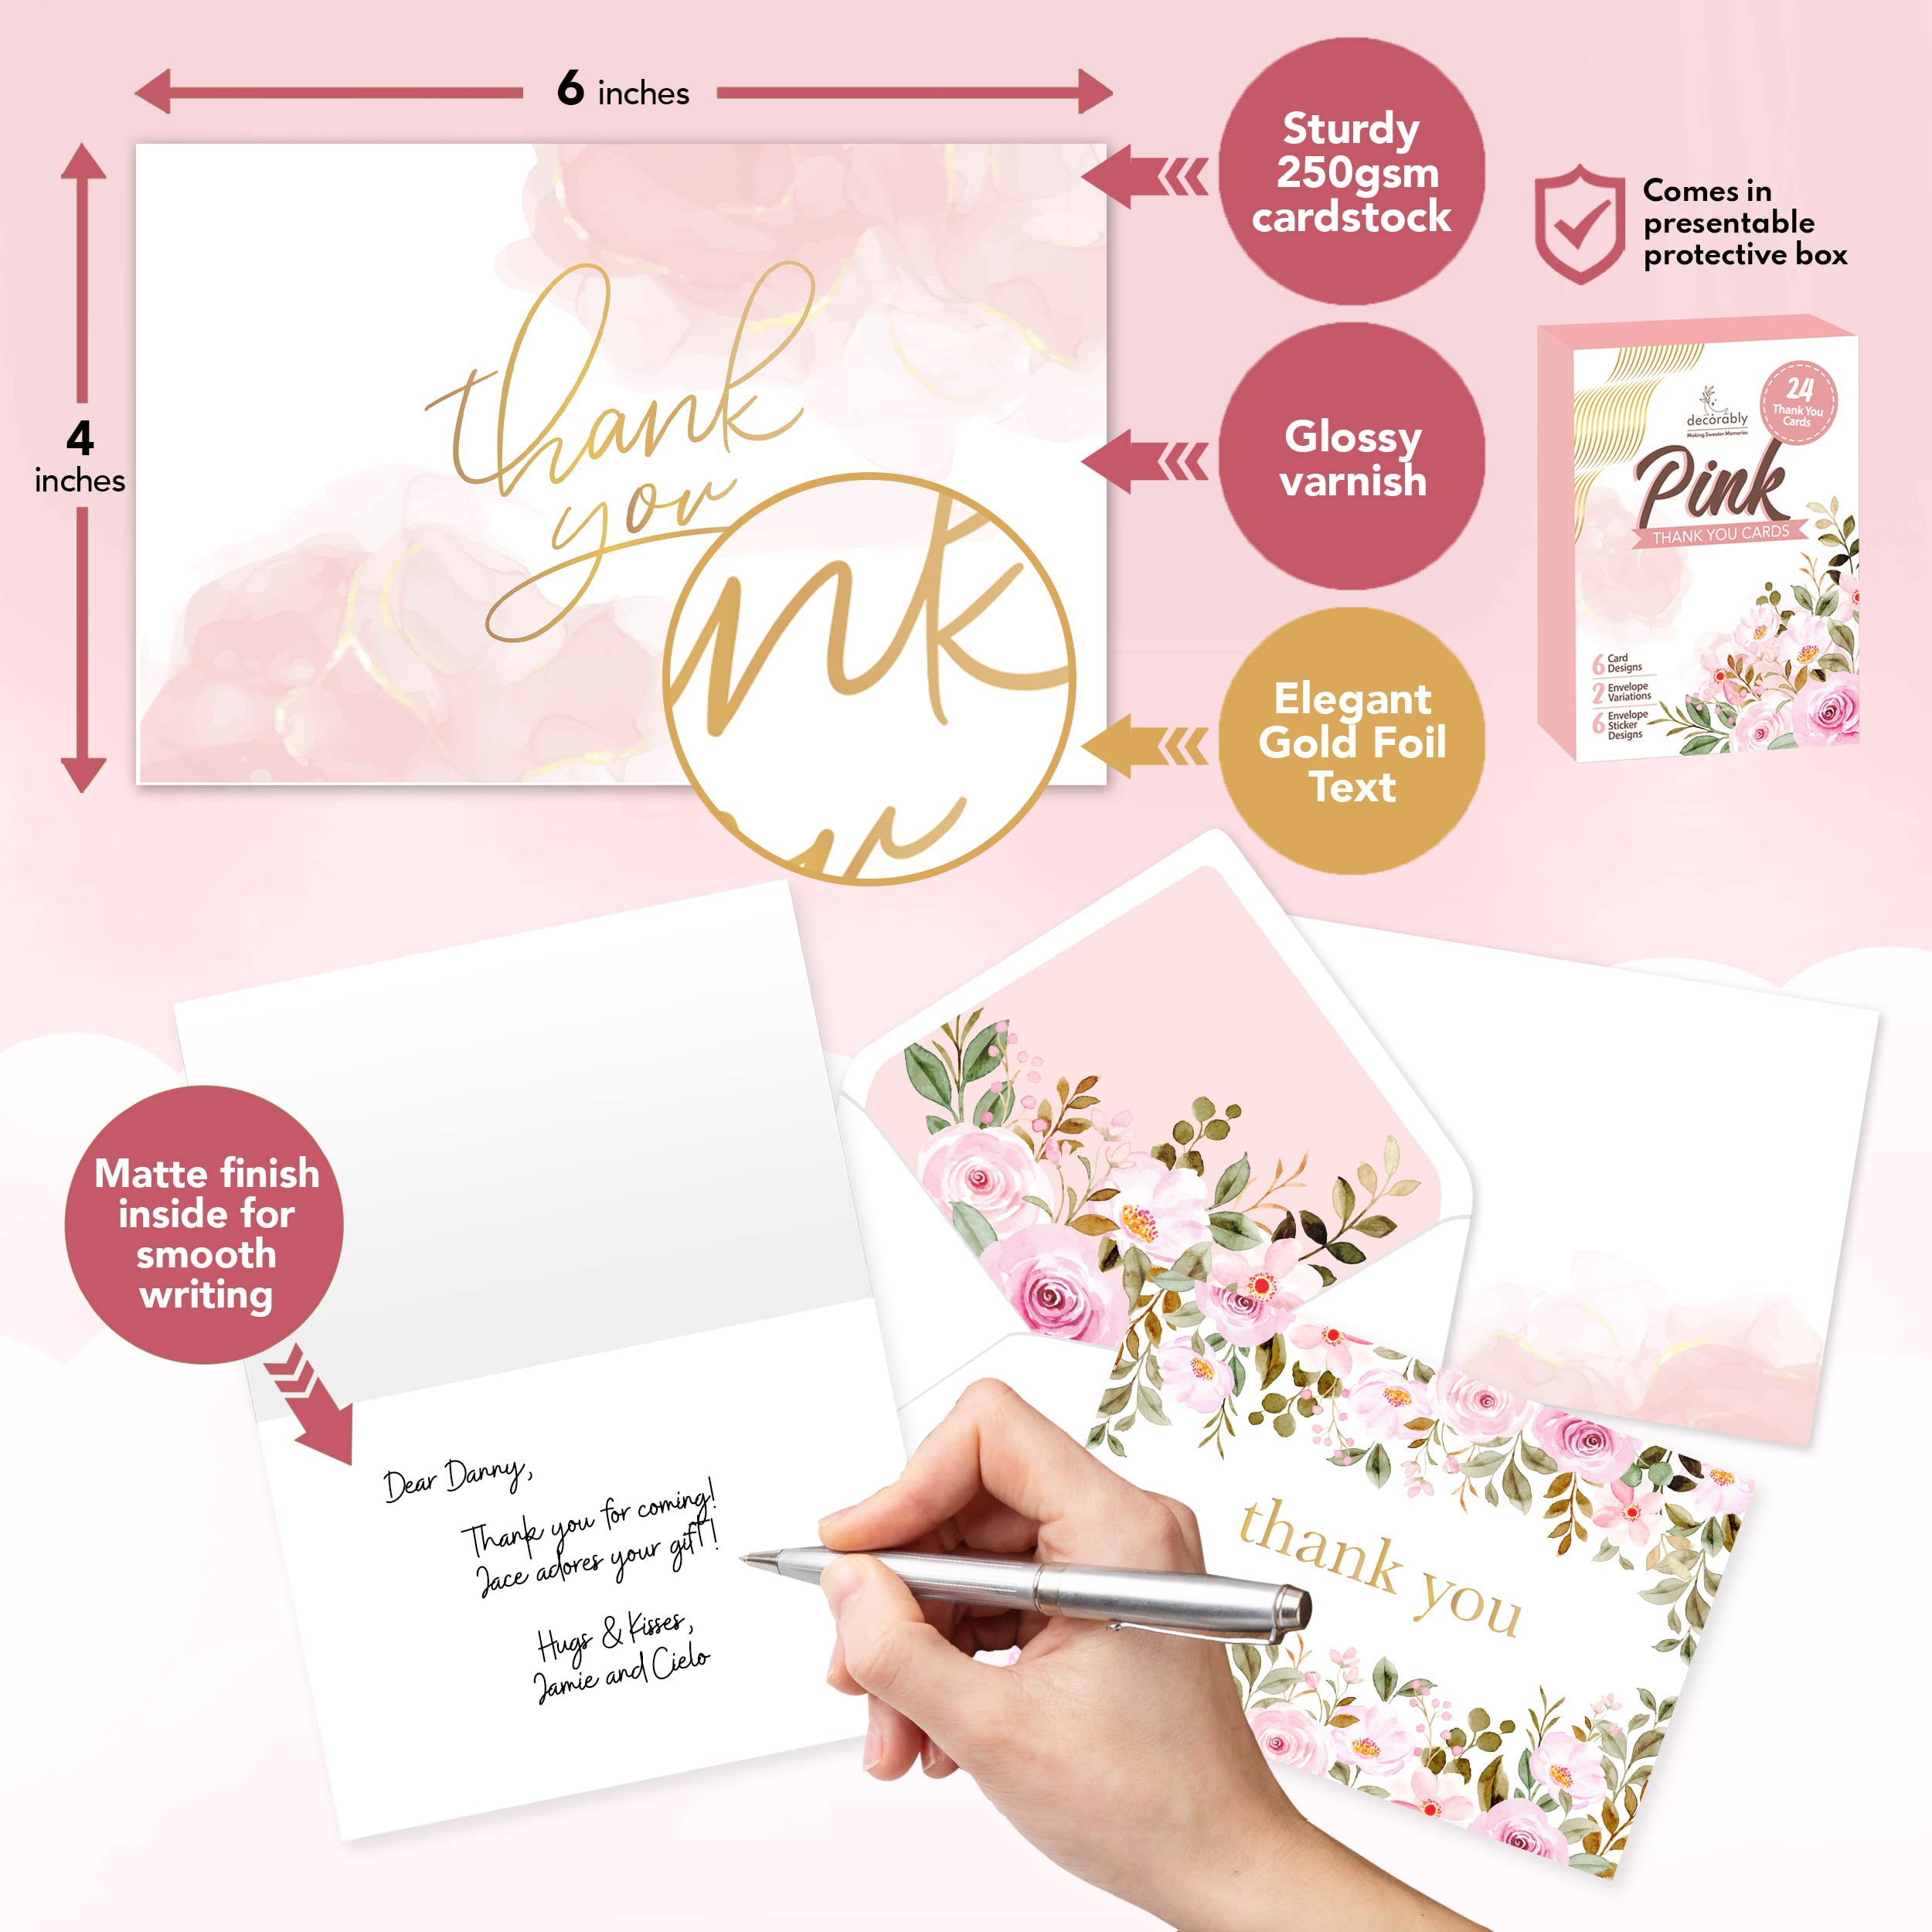 24 Gold-Foiled Pink Thank You Cards with Envelopes - 6 Designs Thank You Cards Pink and Gold, Pink Flower Thank You Cards for Baby Shower Thank You Cards Girl, Floral Thank You Cards with Envelopes